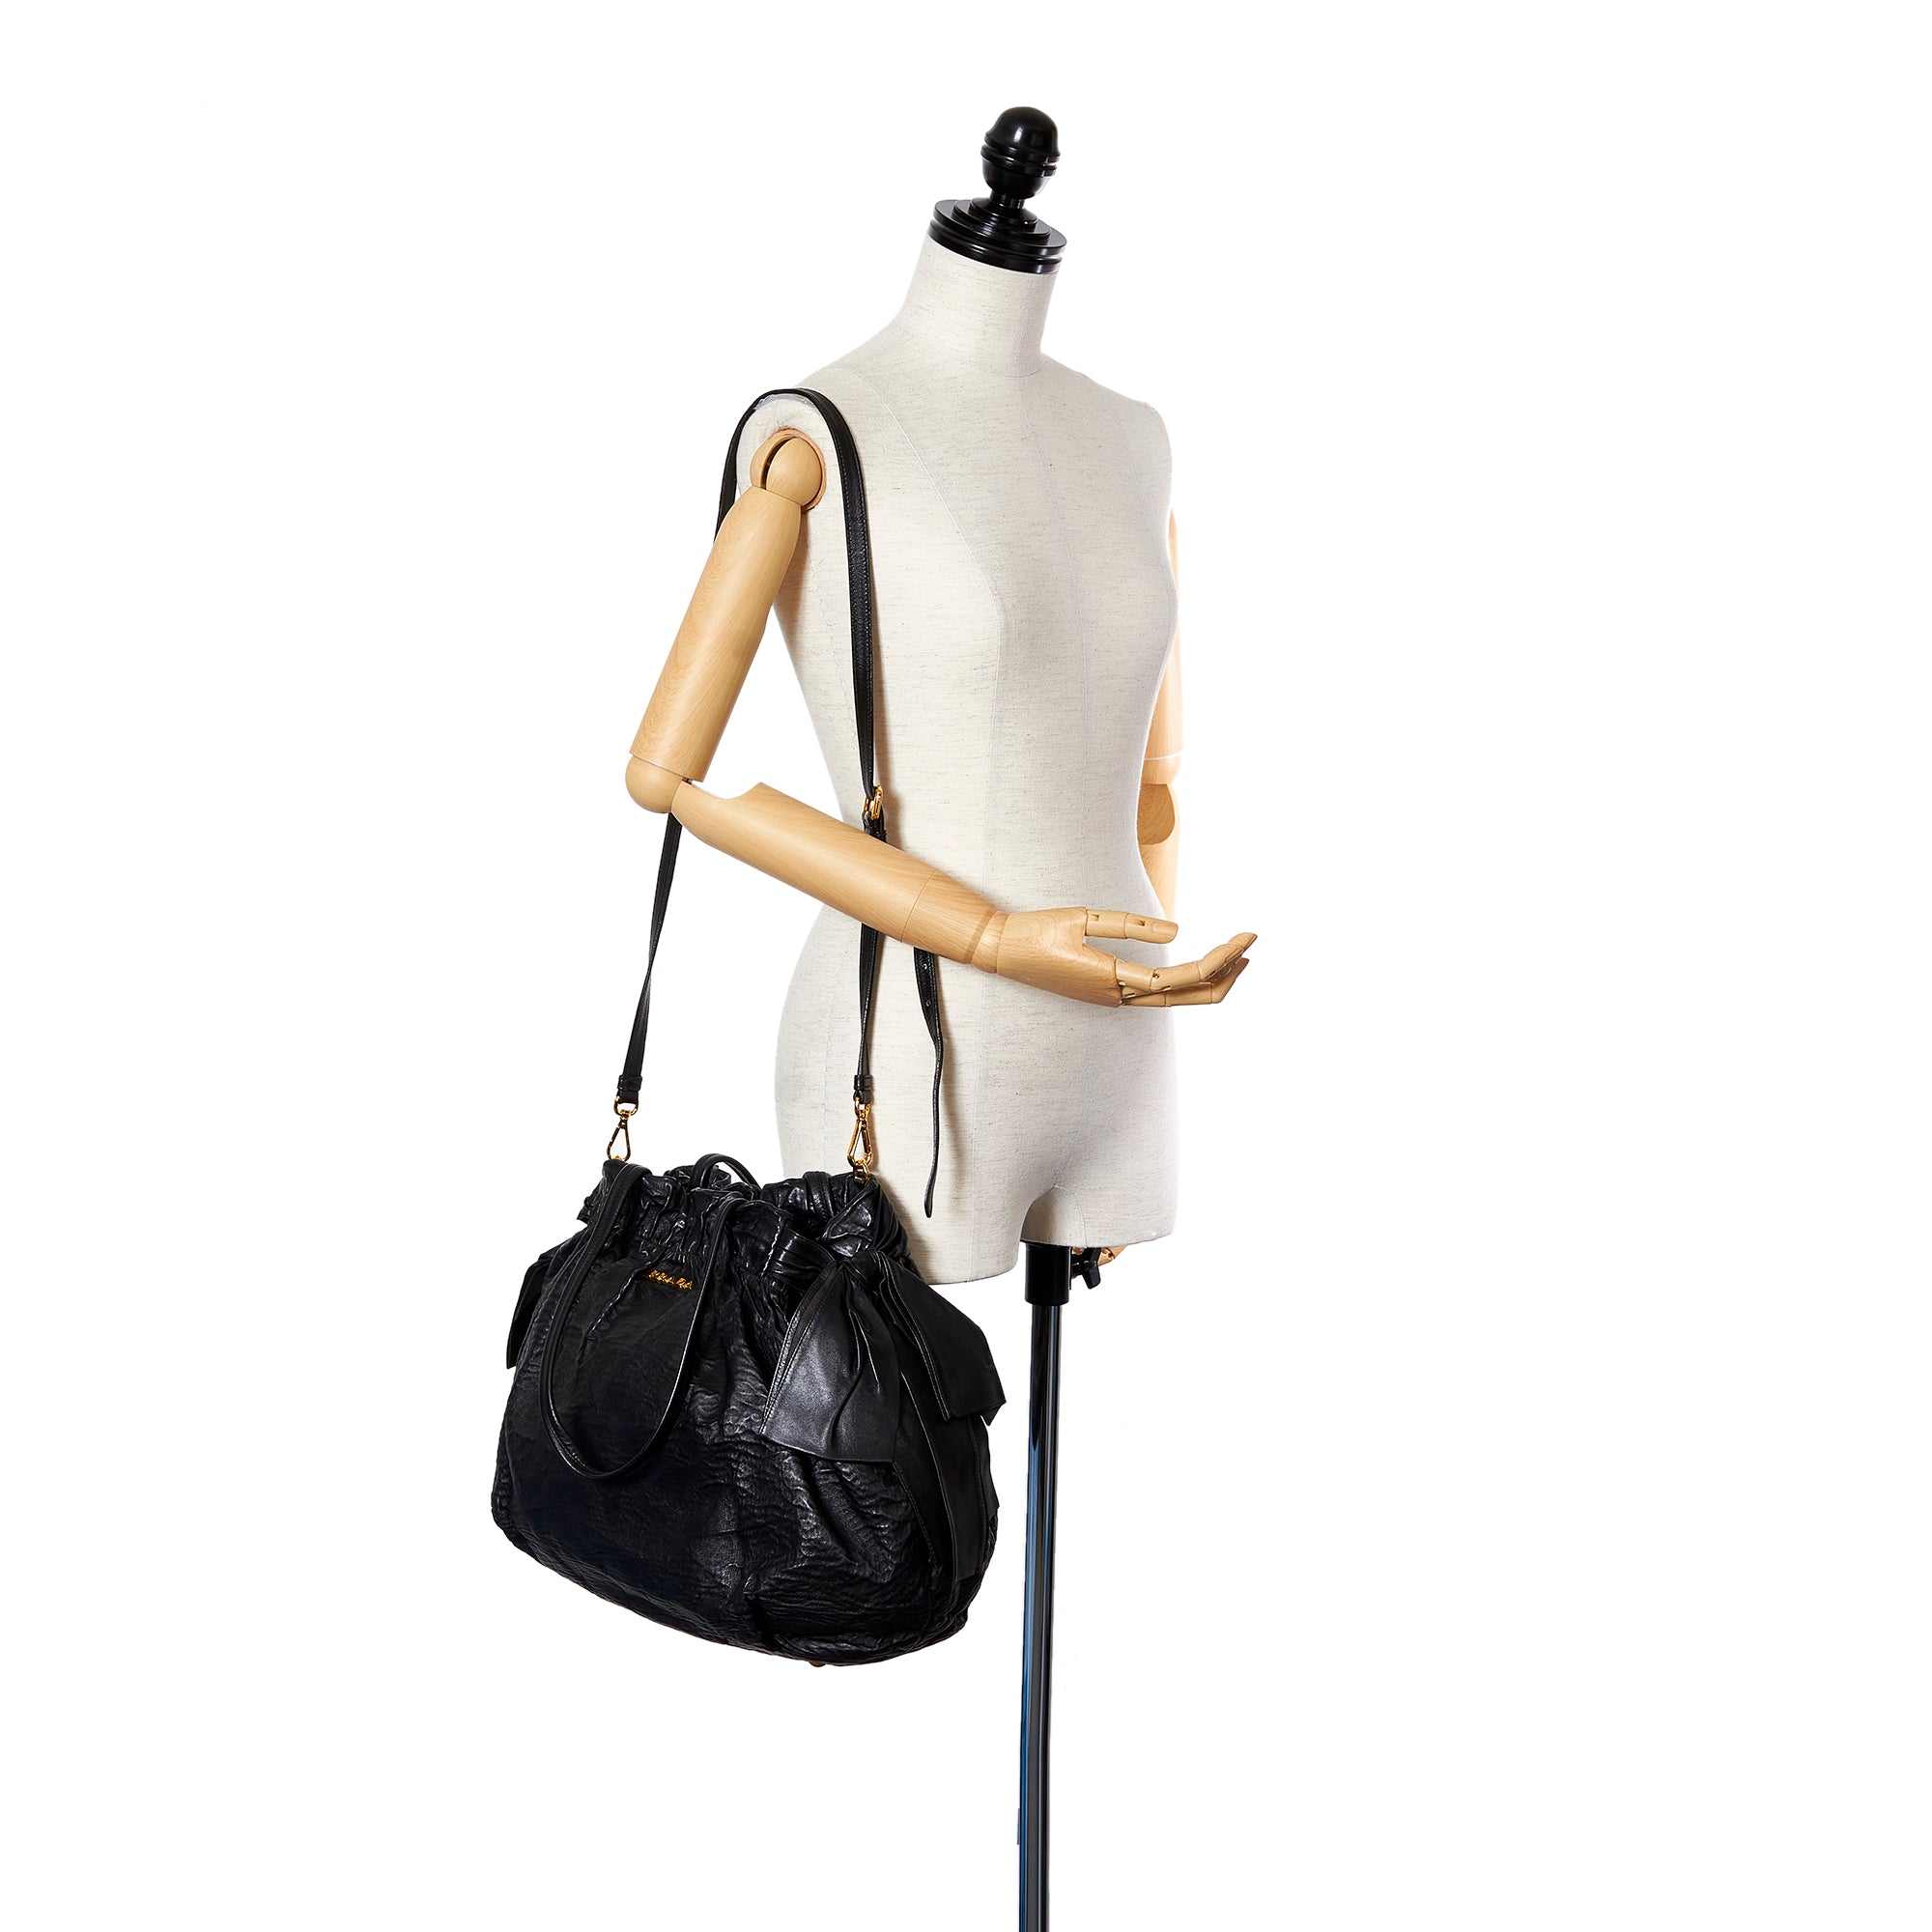 Prada Bow Bag, Shop The Largest Collection